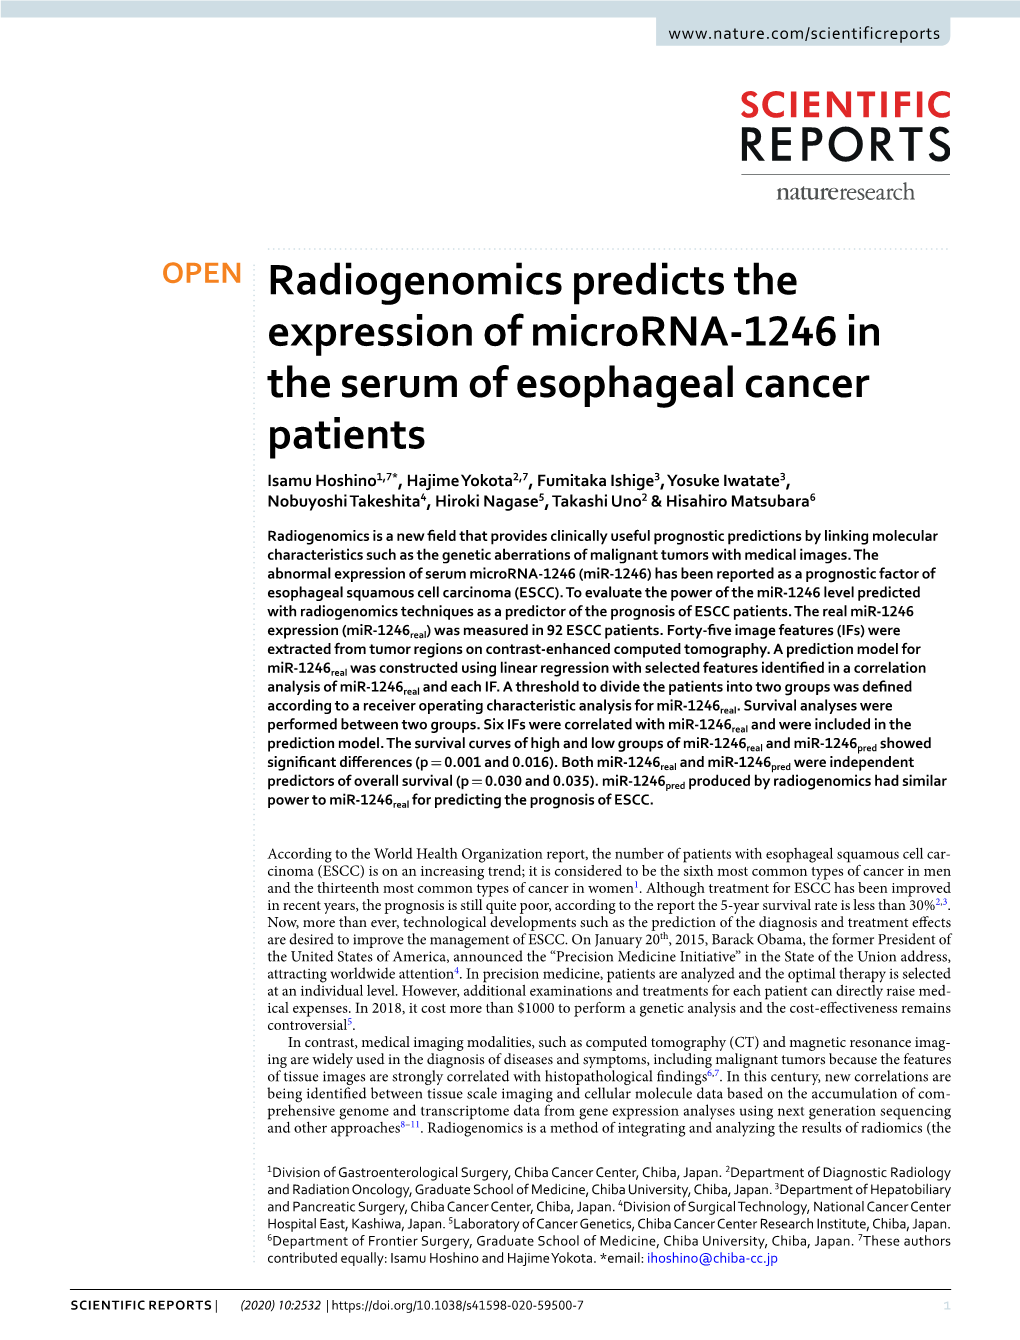 Radiogenomics Predicts the Expression of Microrna-1246 in the Serum of Esophageal Cancer Patients